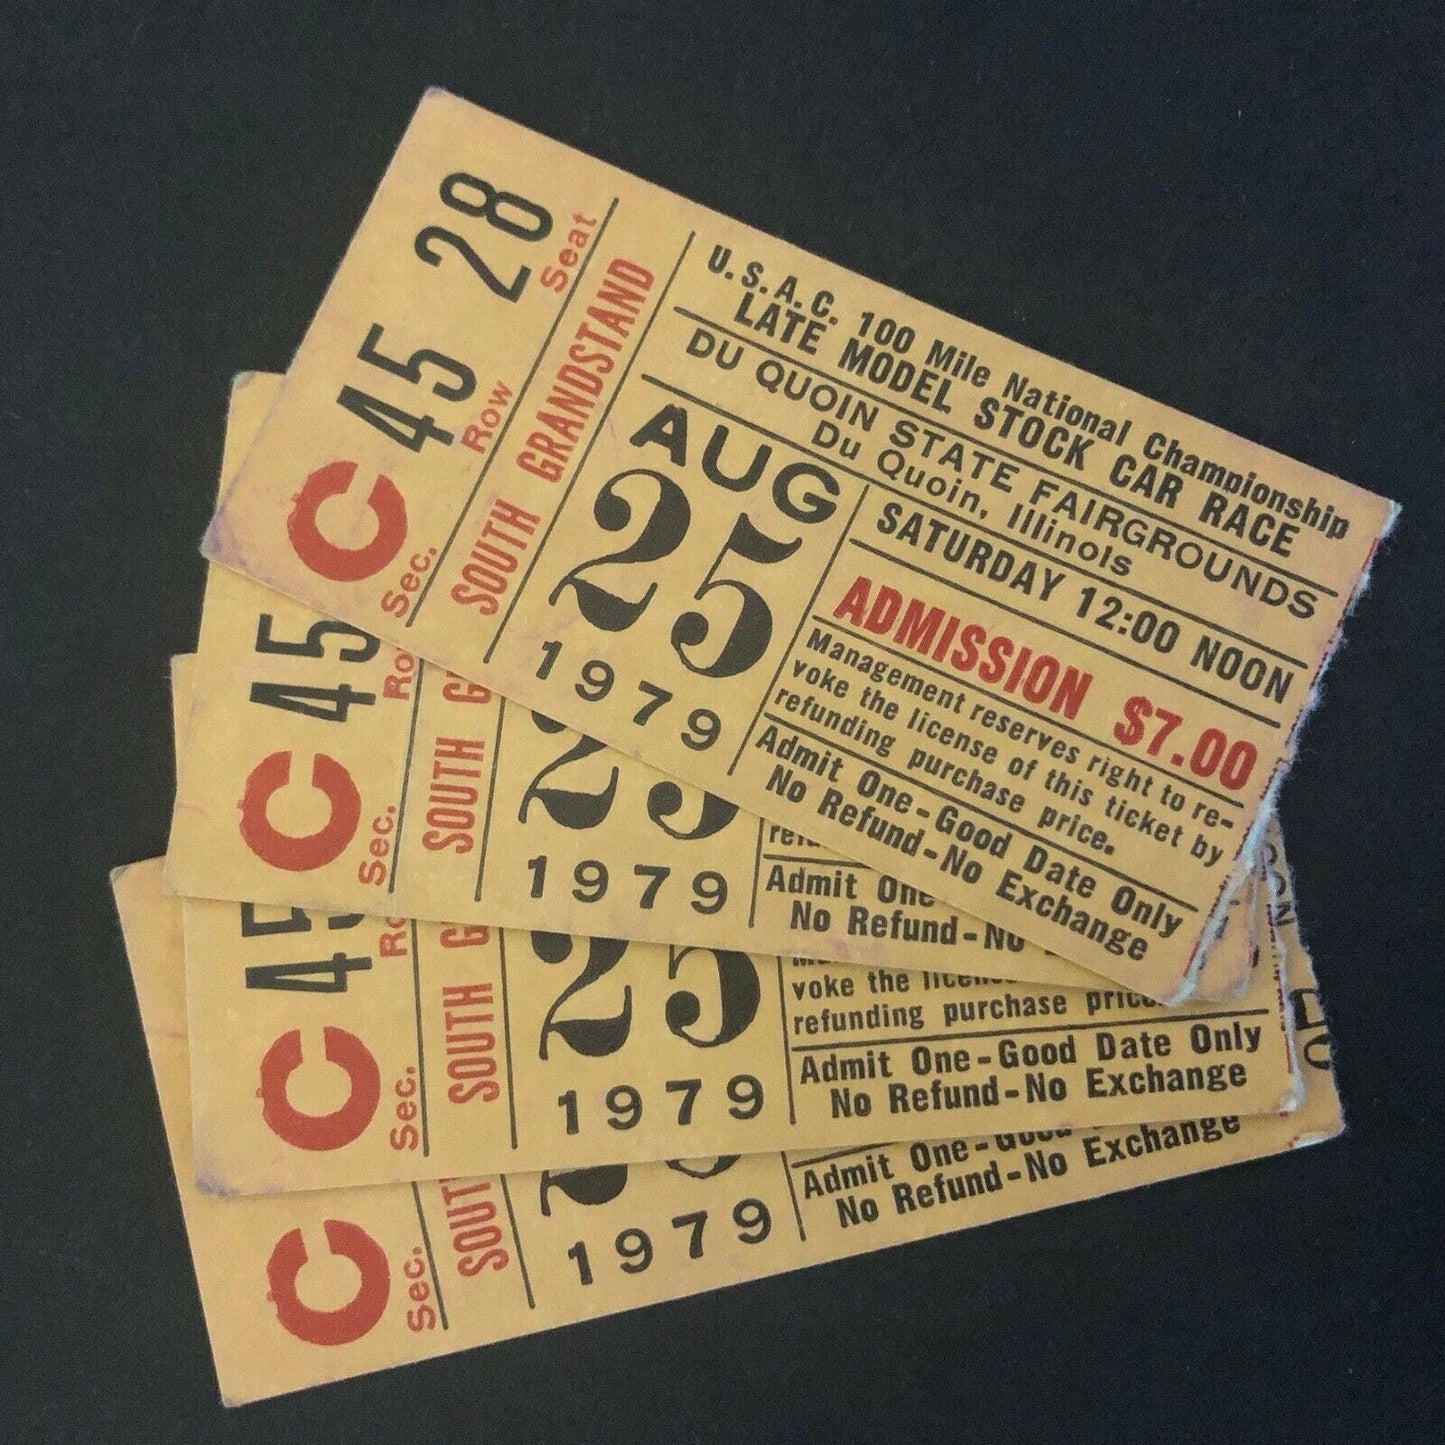 4 1979 Du Quoin State Fair USAC 100 Mile Late Model Stock Car Race Ticket Stubs